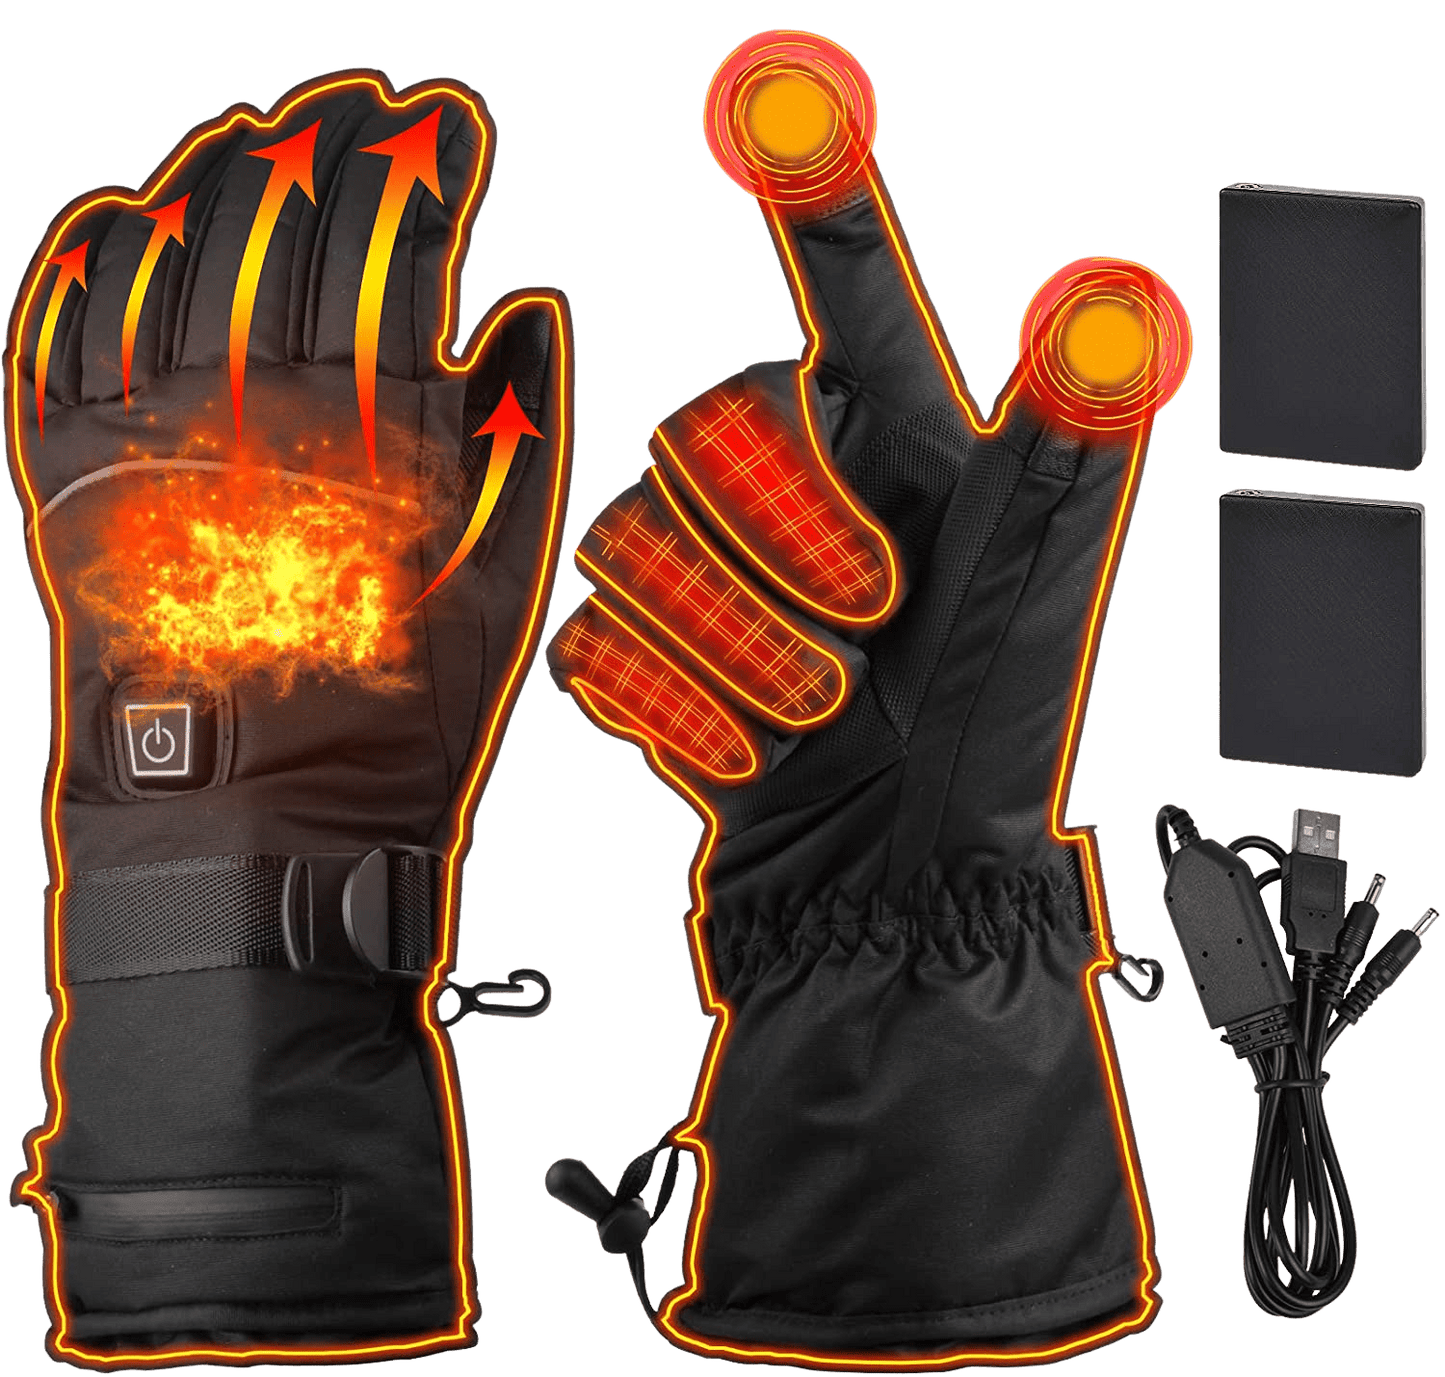 Heated Gloves Electric Heating Gloves| USB Adjustable Rechargeable 4000mAh Touchscreen Waterproof Insulated Hand Warmer Mitten for Outdoor Ski Climb Hiking Cycling Motorcycle Hunting Fishing  - Home Decor Gifts and More